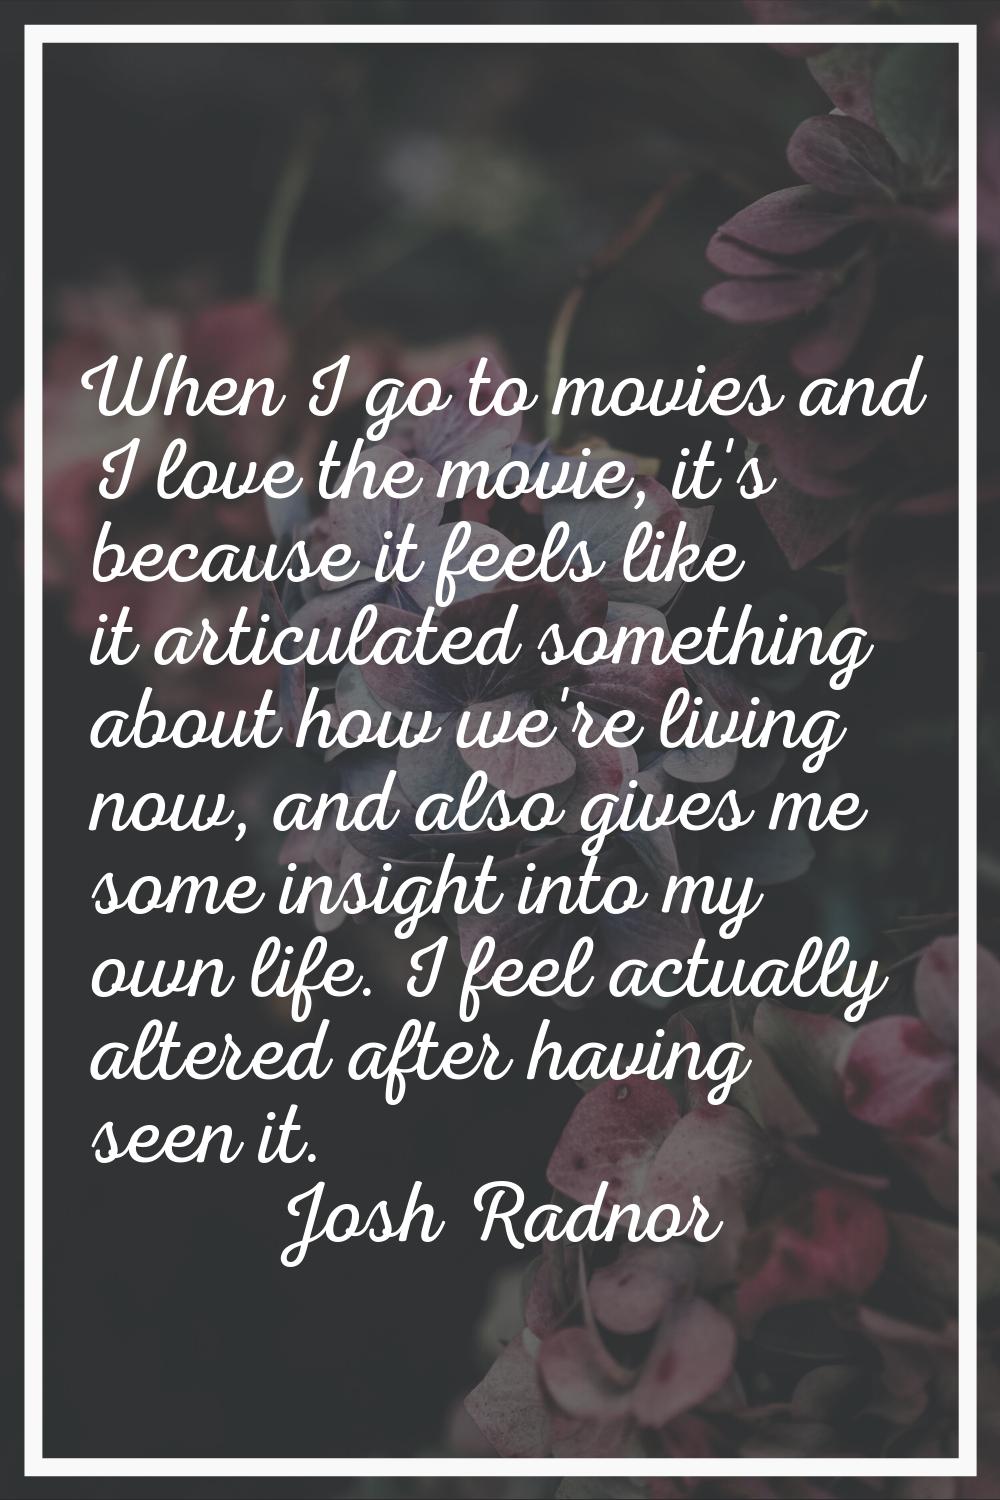 When I go to movies and I love the movie, it's because it feels like it articulated something about